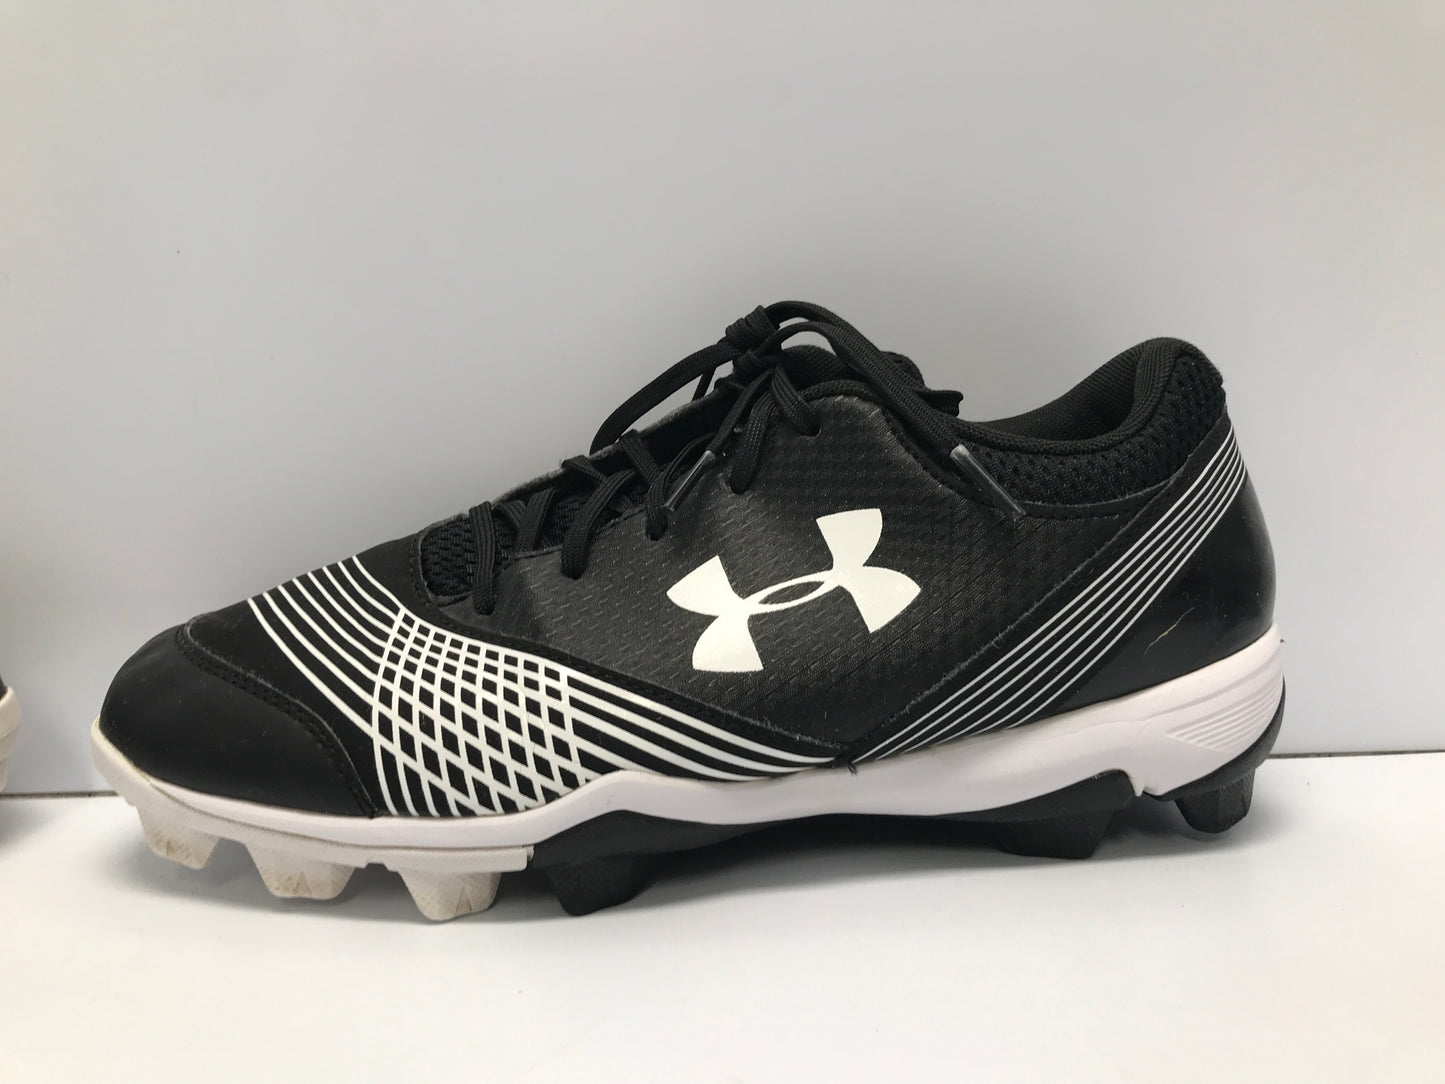 Baseball Shoes Cleats Men's Size 8.5 Black White Under Armour Like New